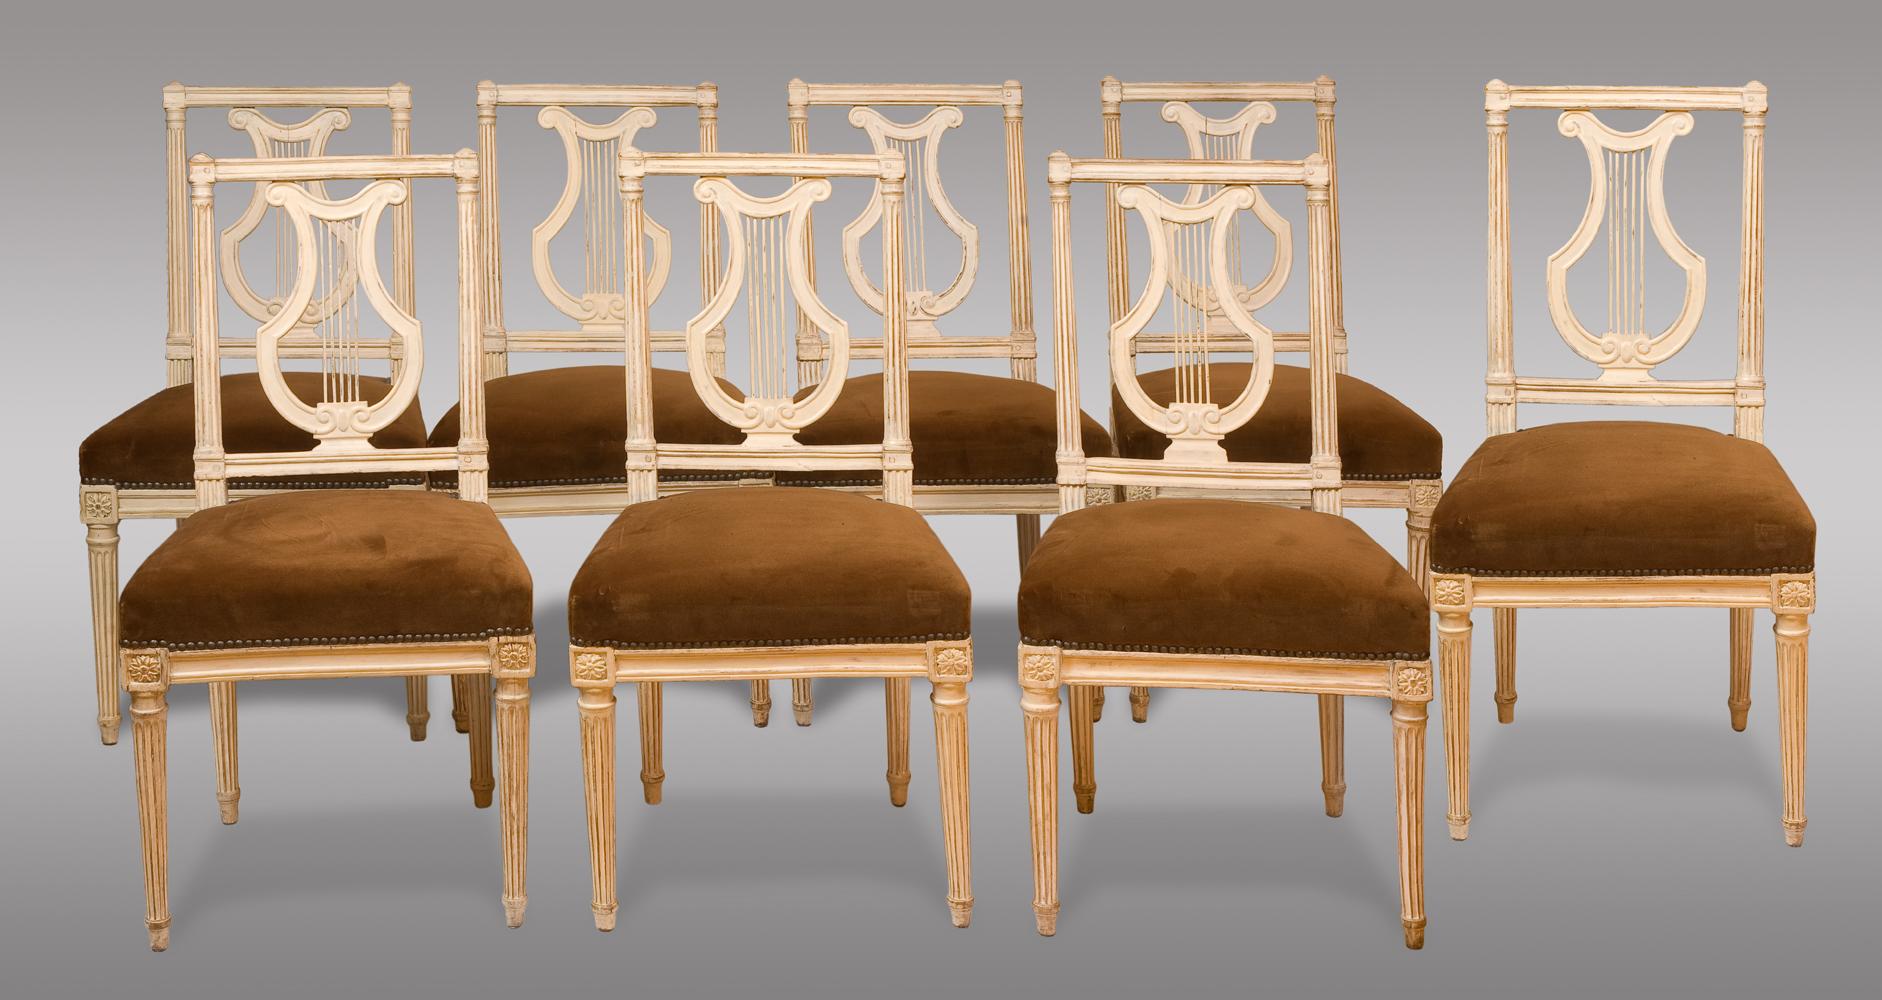 Eigth Louis XVI Painted Chairs, 18th Century In Good Condition For Sale In Saint-Ouen, FR